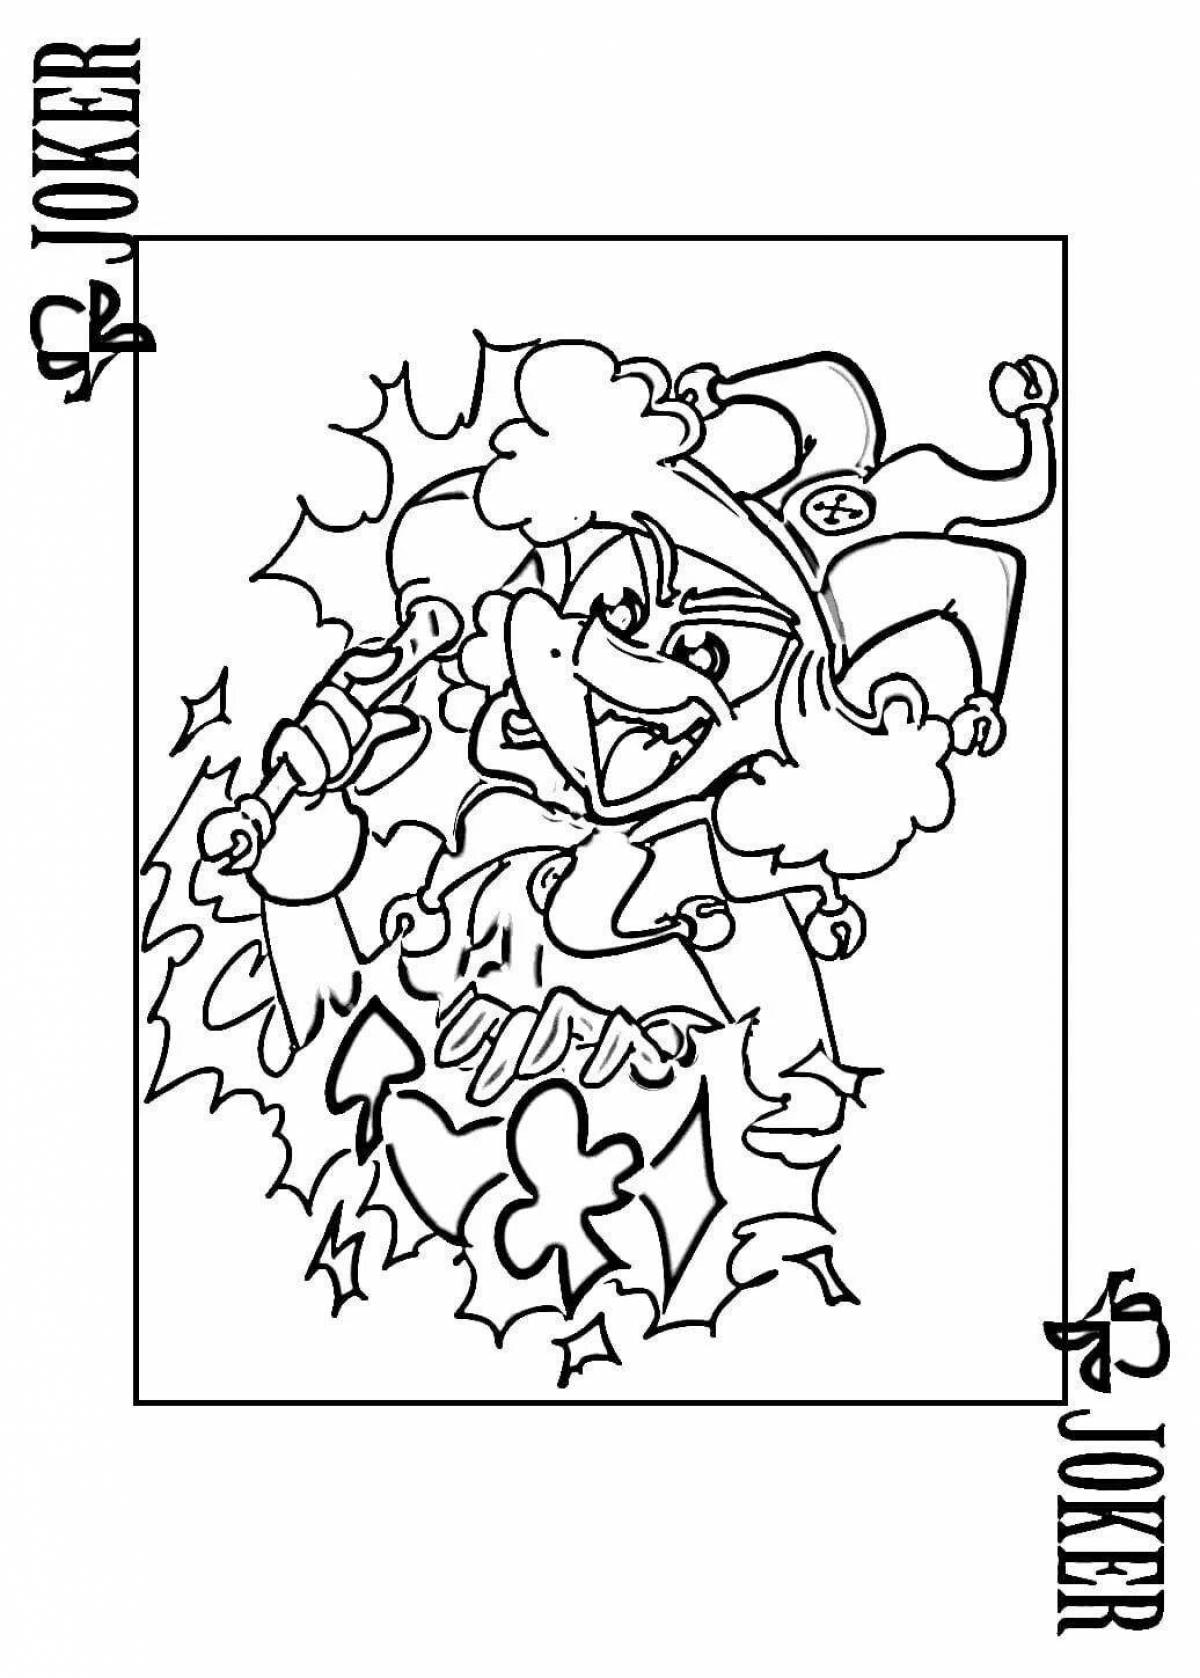 Joyful 13 cards all coloring pages